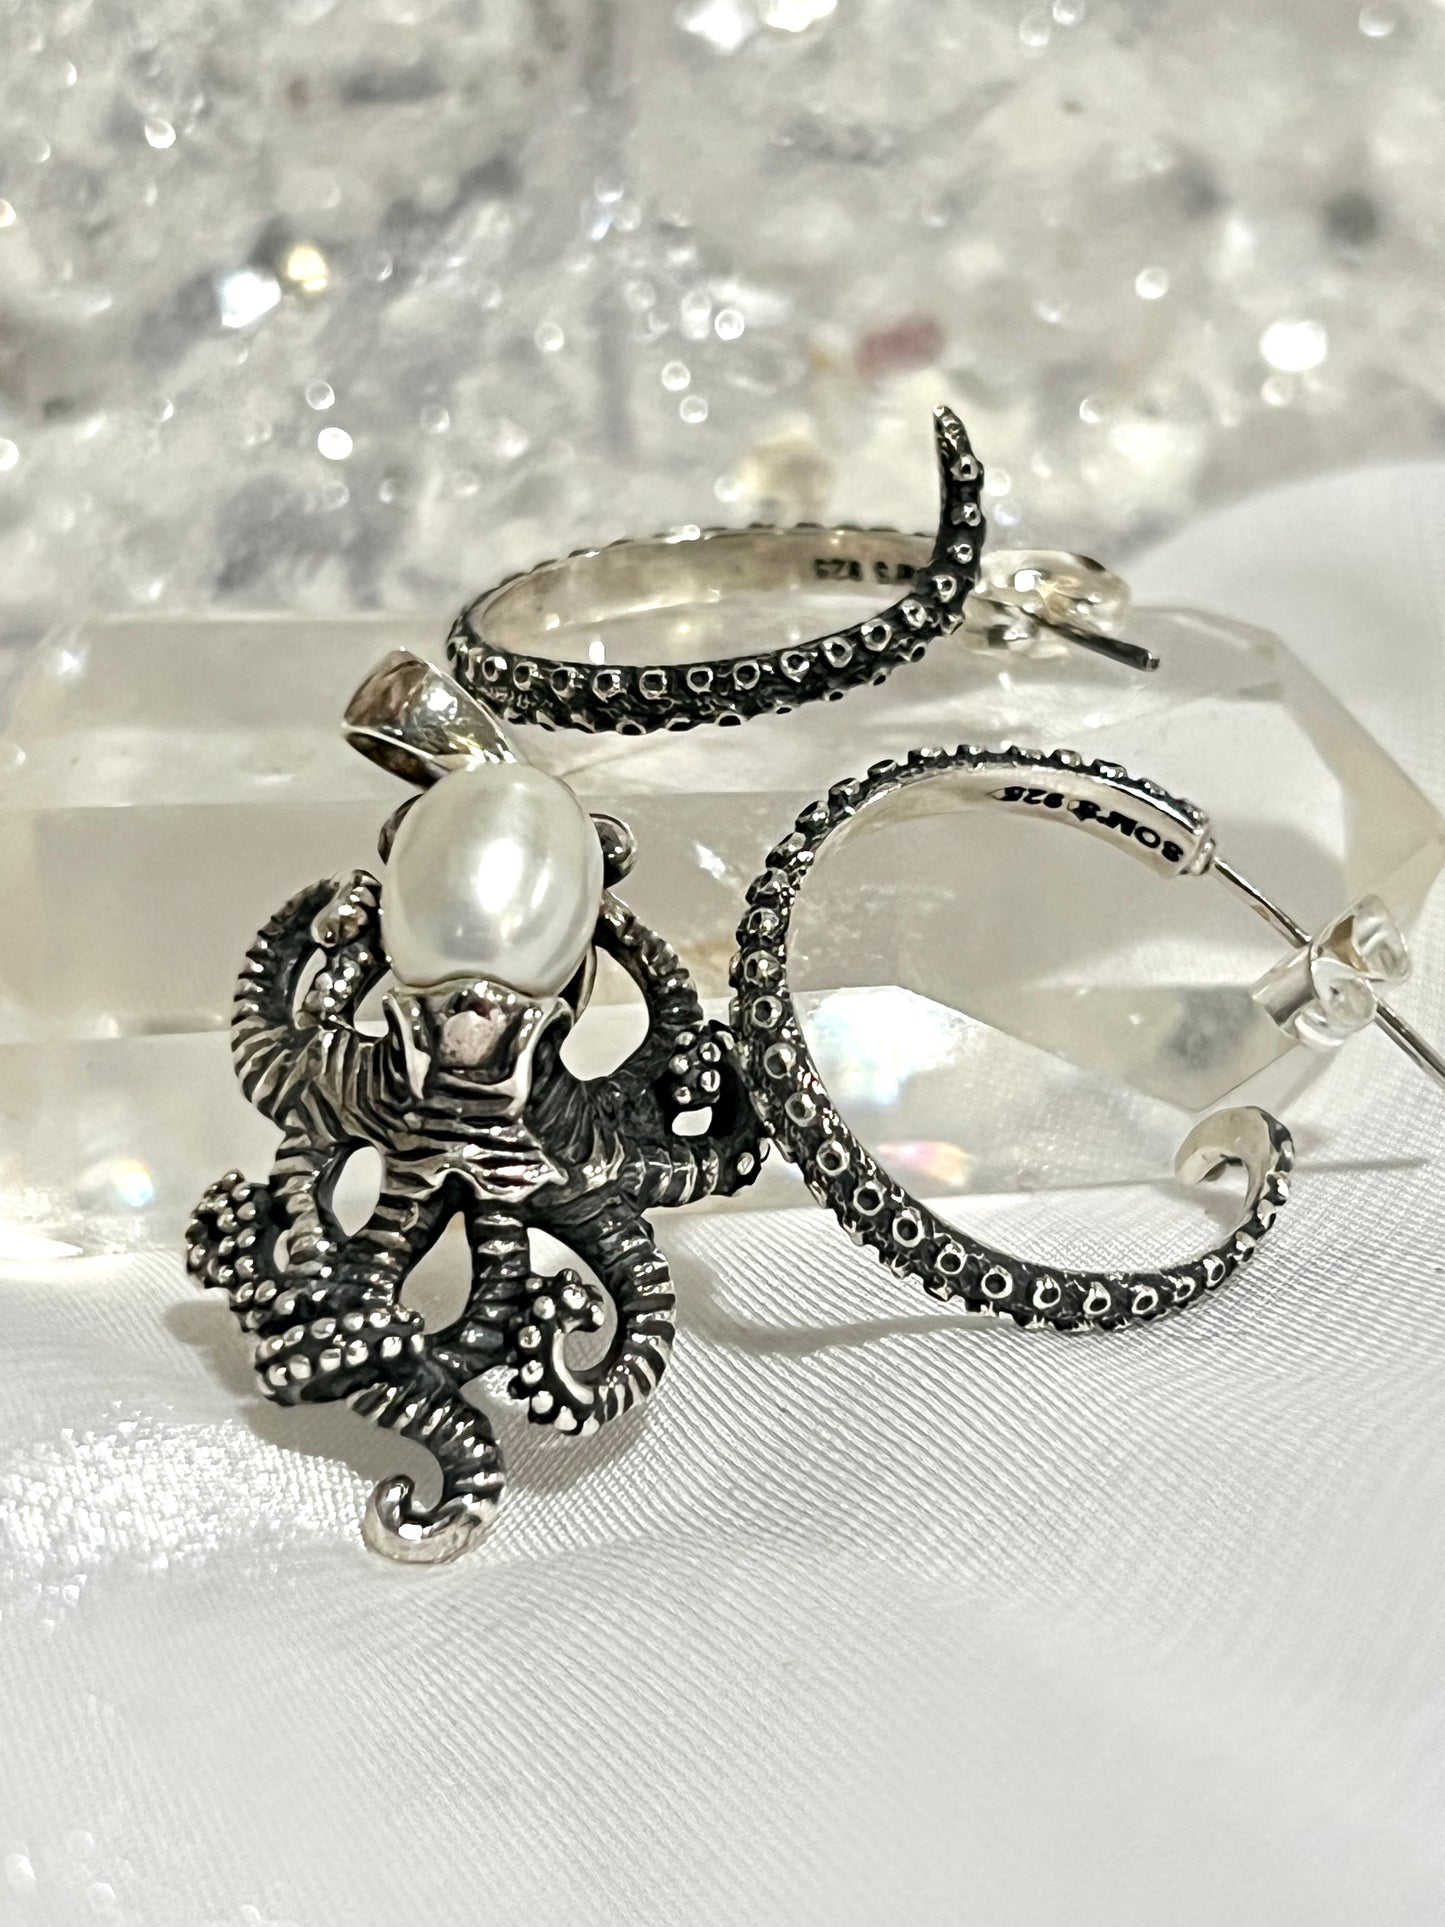 Super Silver's Handcrafted Octopus Tentacle Hoops with an oxidized finish, handmade in sterling silver.